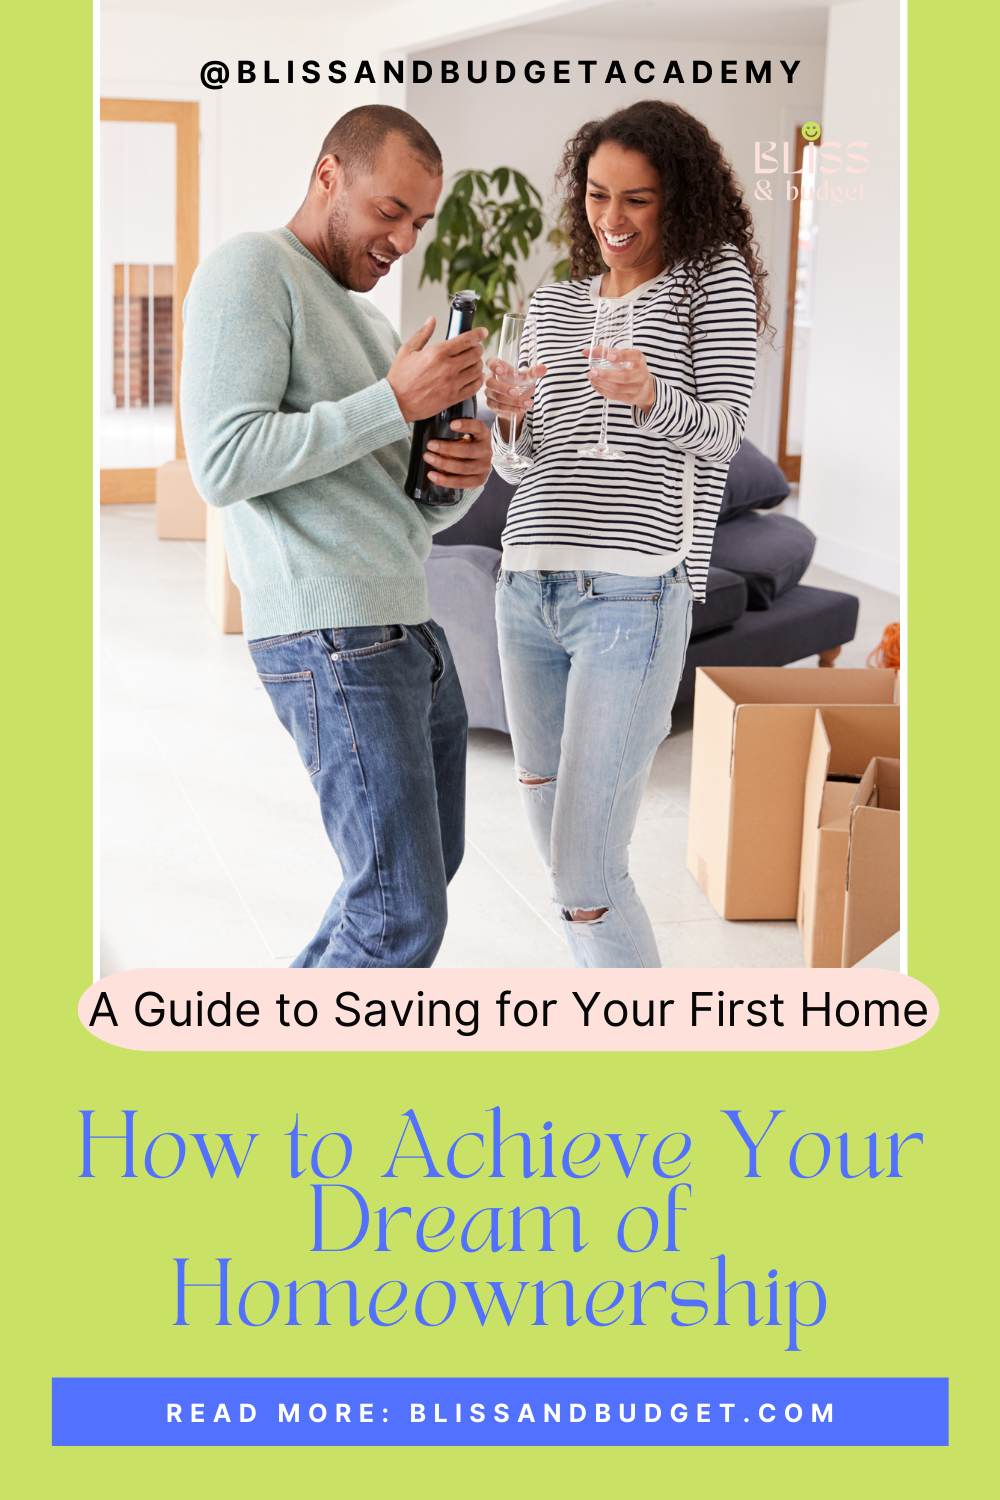 How to Achieve Your Dream of Homeownership: A Guide to Saving for Your First Home